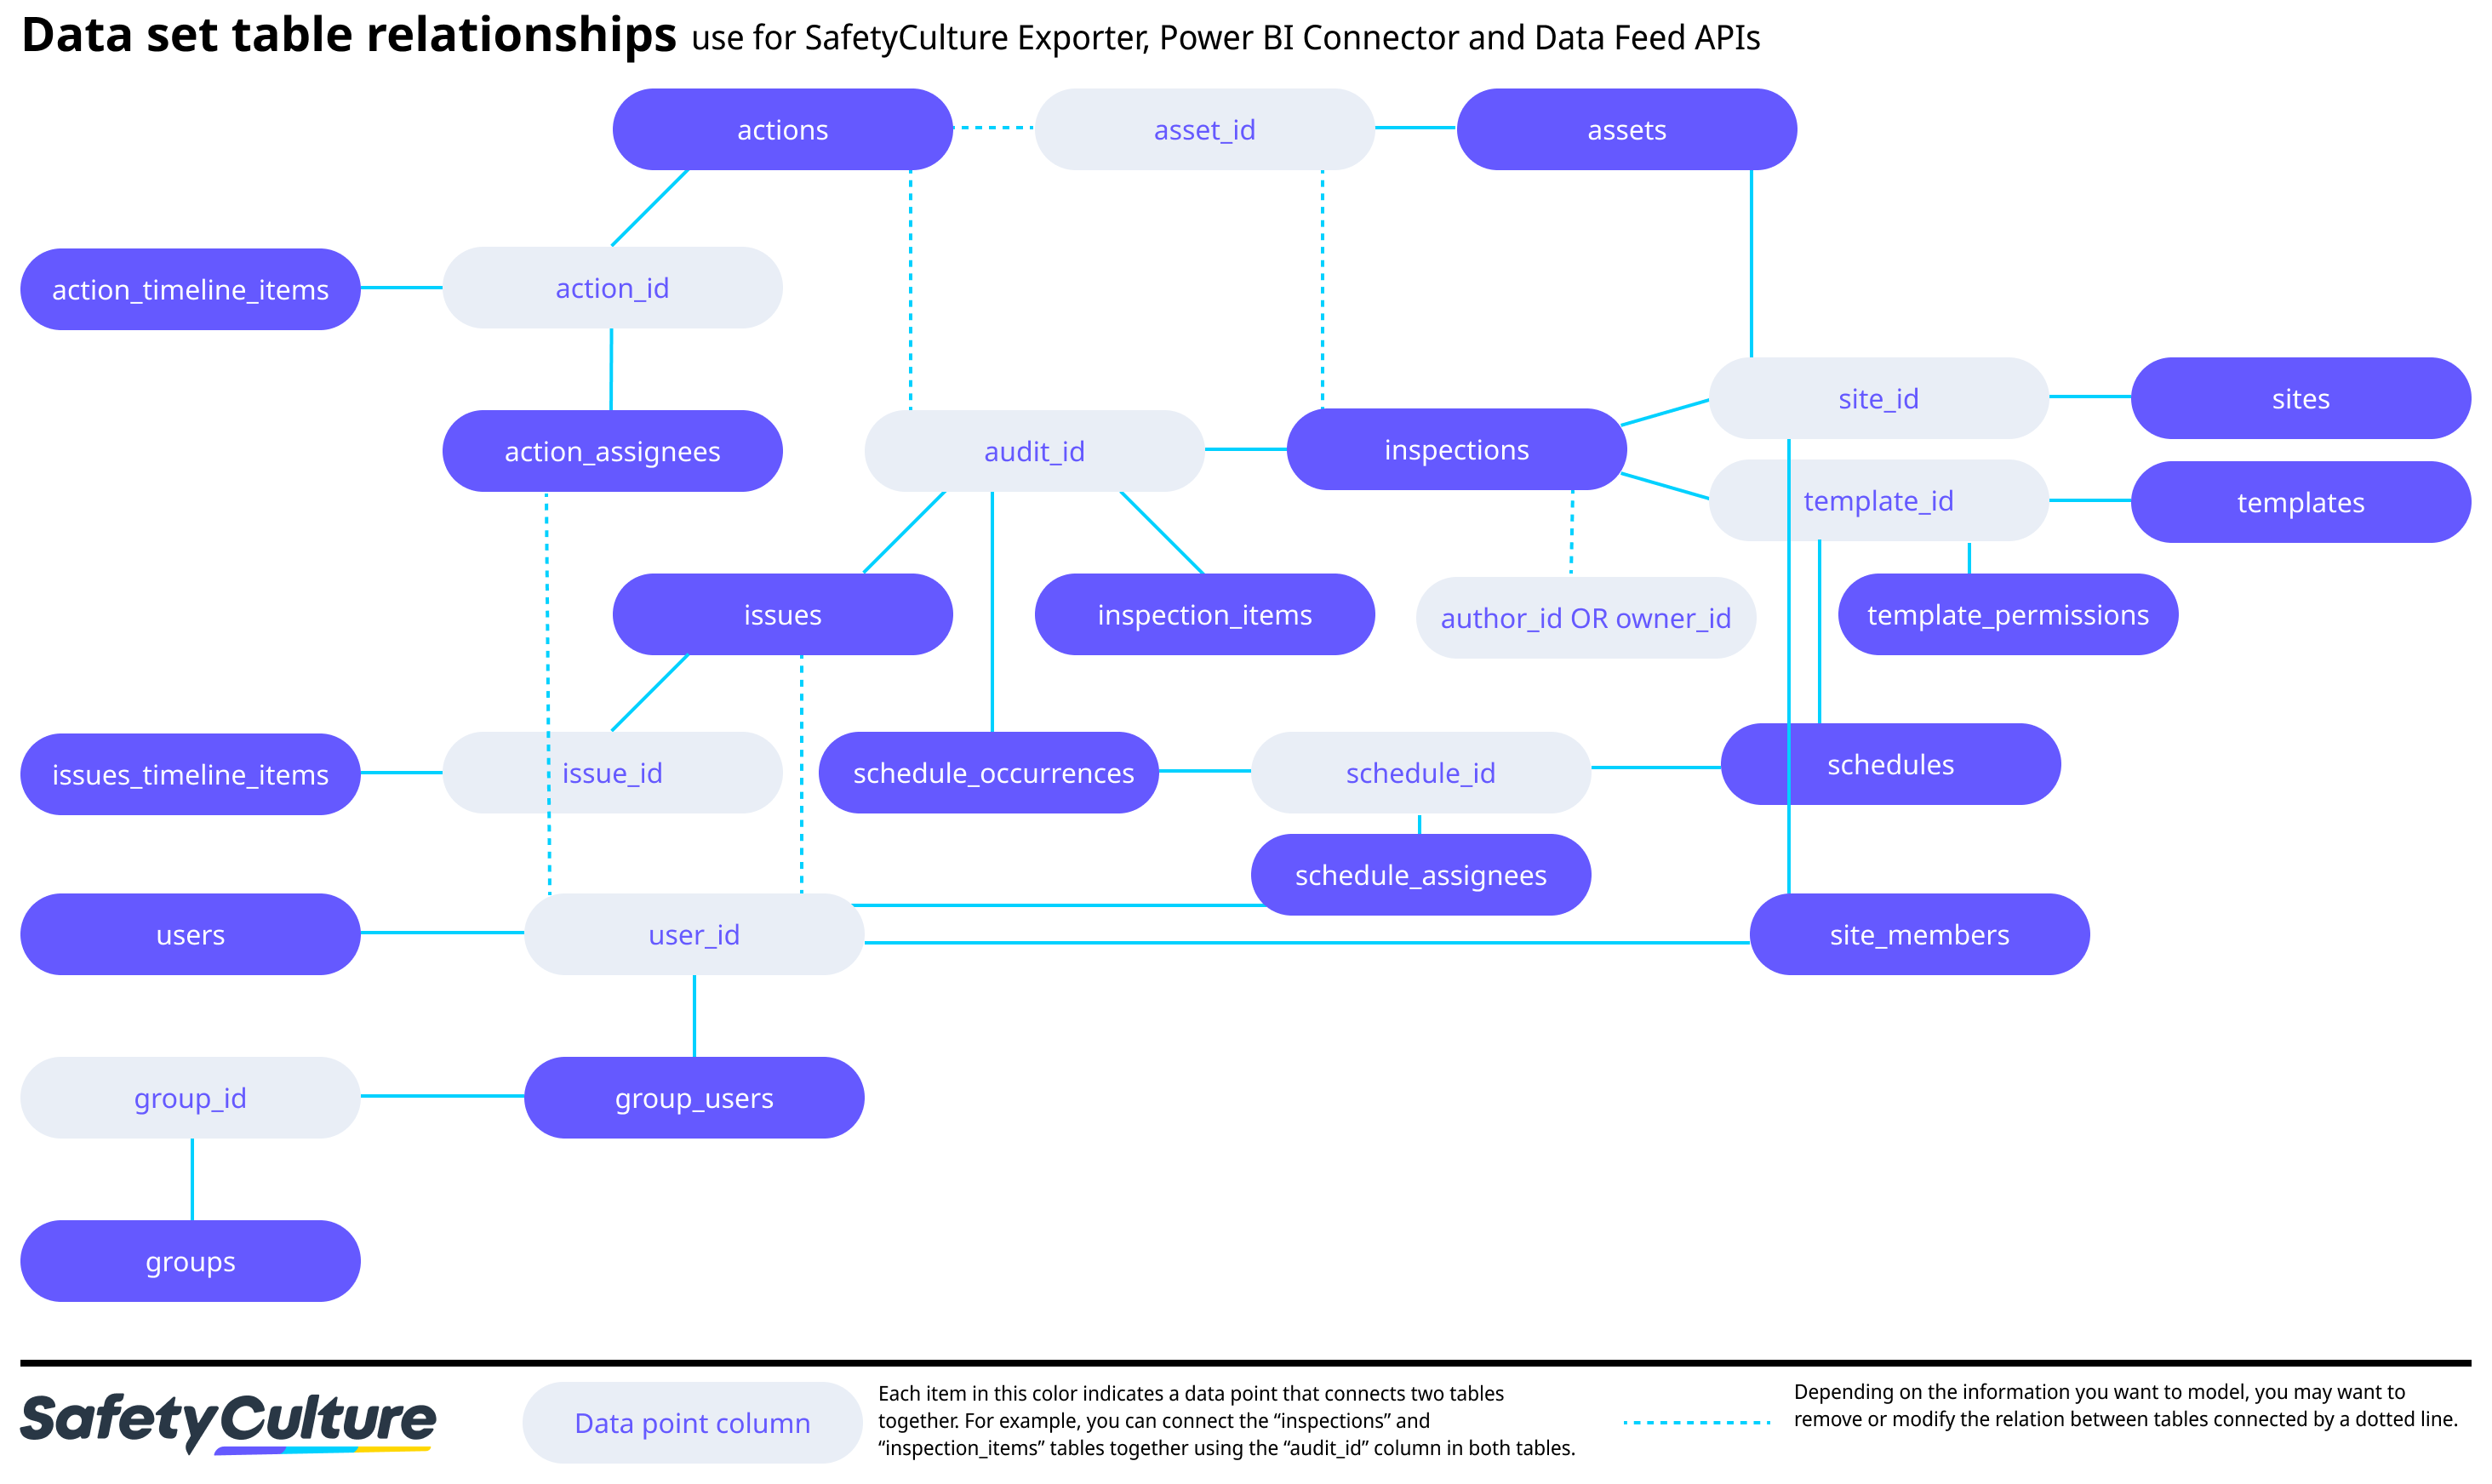 A chart showing the relationships between SafetyCulture data set tables.